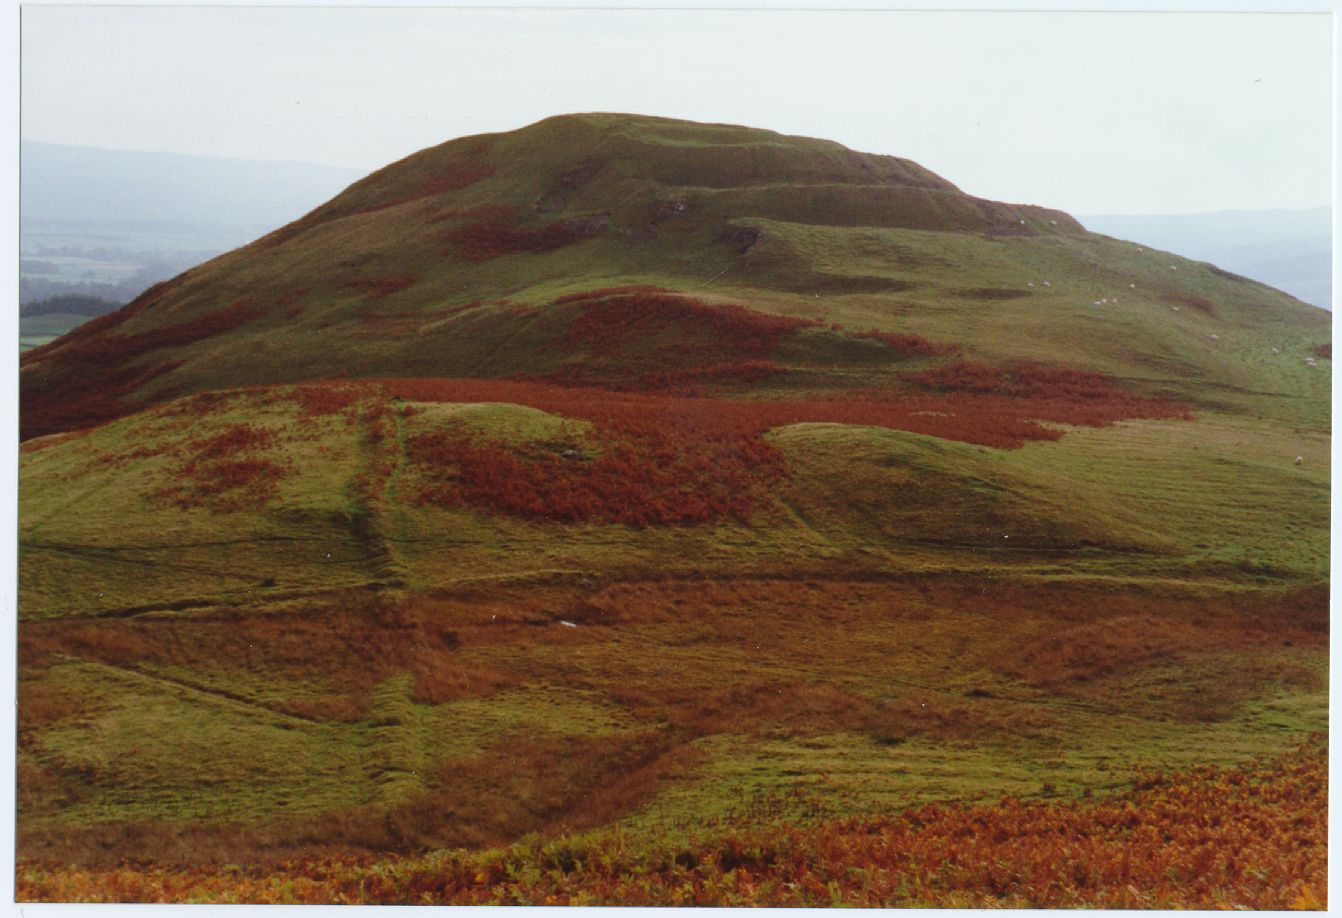 Tynron Doon from the north-west, showing the 2 ramparts and three ditches. In the left foreground two sod dykes cross at right angles